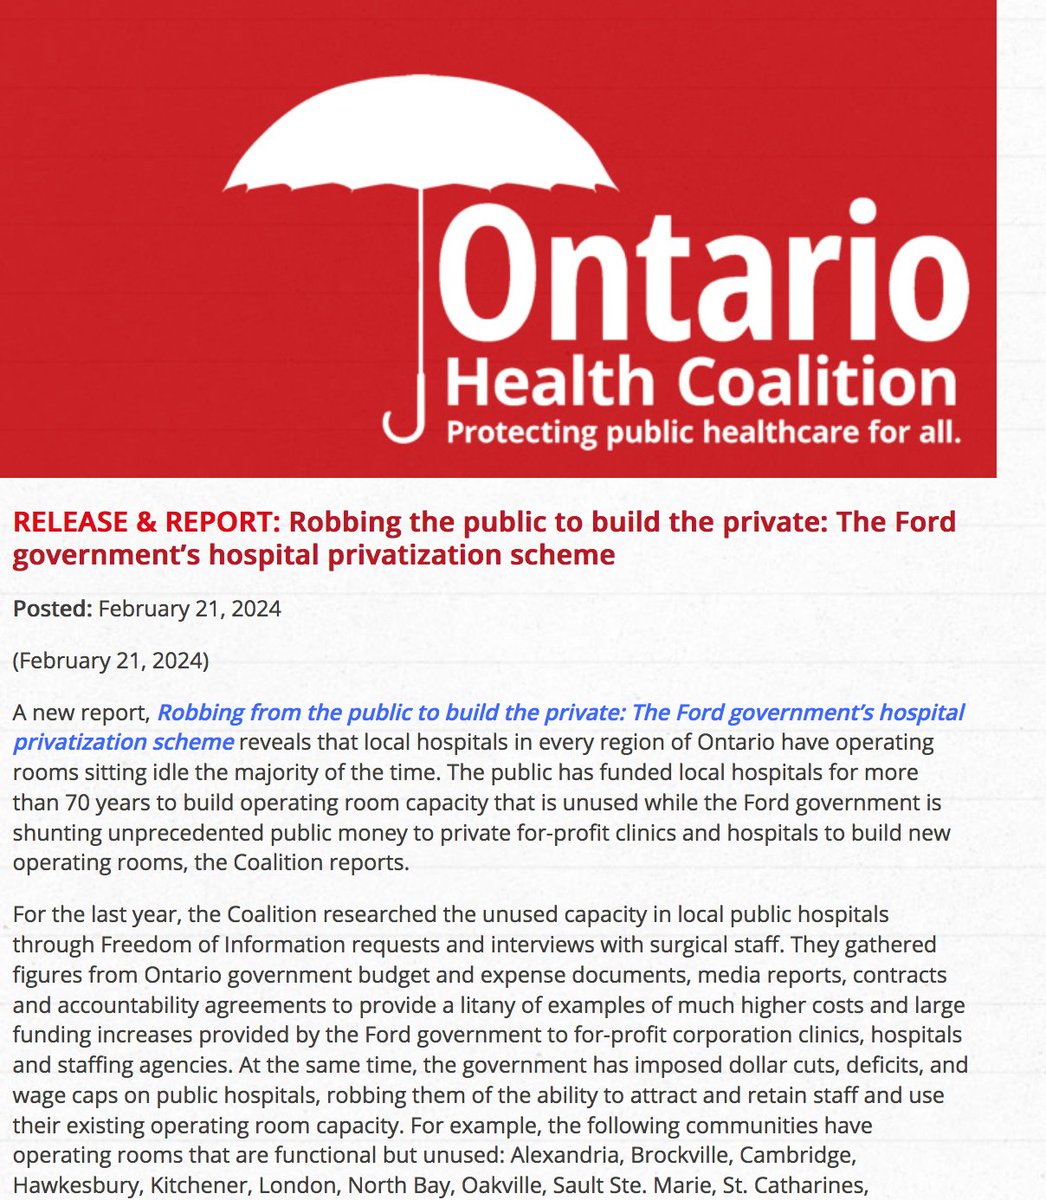 How @fordnation is Getting It Done in #healthcare. “Hundreds of million$ in public money is being used to dismantle and #privatize our public hospitals, robbing the public to build the private.' @NatalieMehra1 @OntarioHealthC #Notjusthighwayrobbery ontariohealthcoalition.ca/index.php/rele…